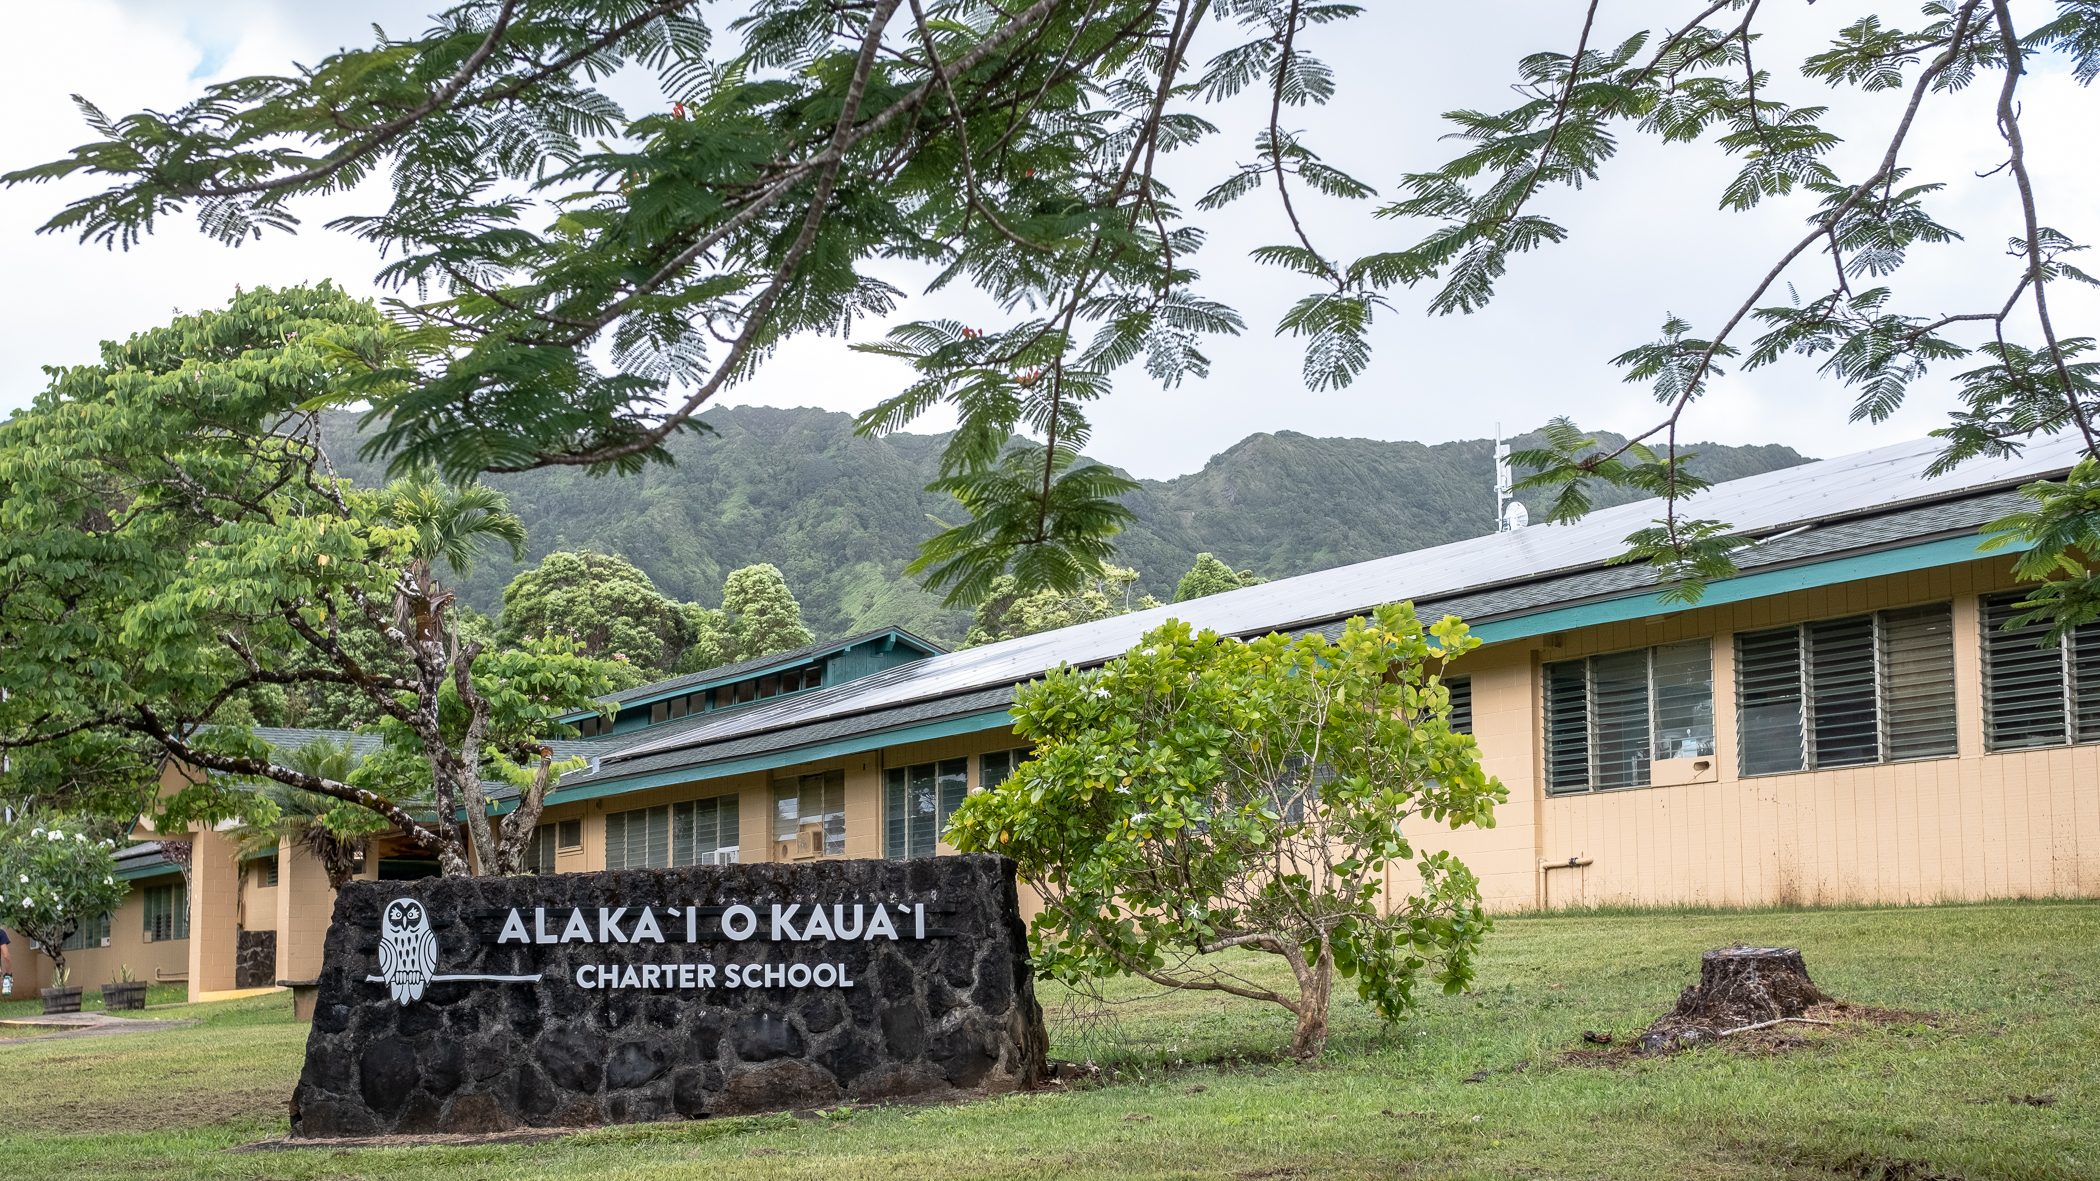 image of the "AOK" sign with the school building in the background